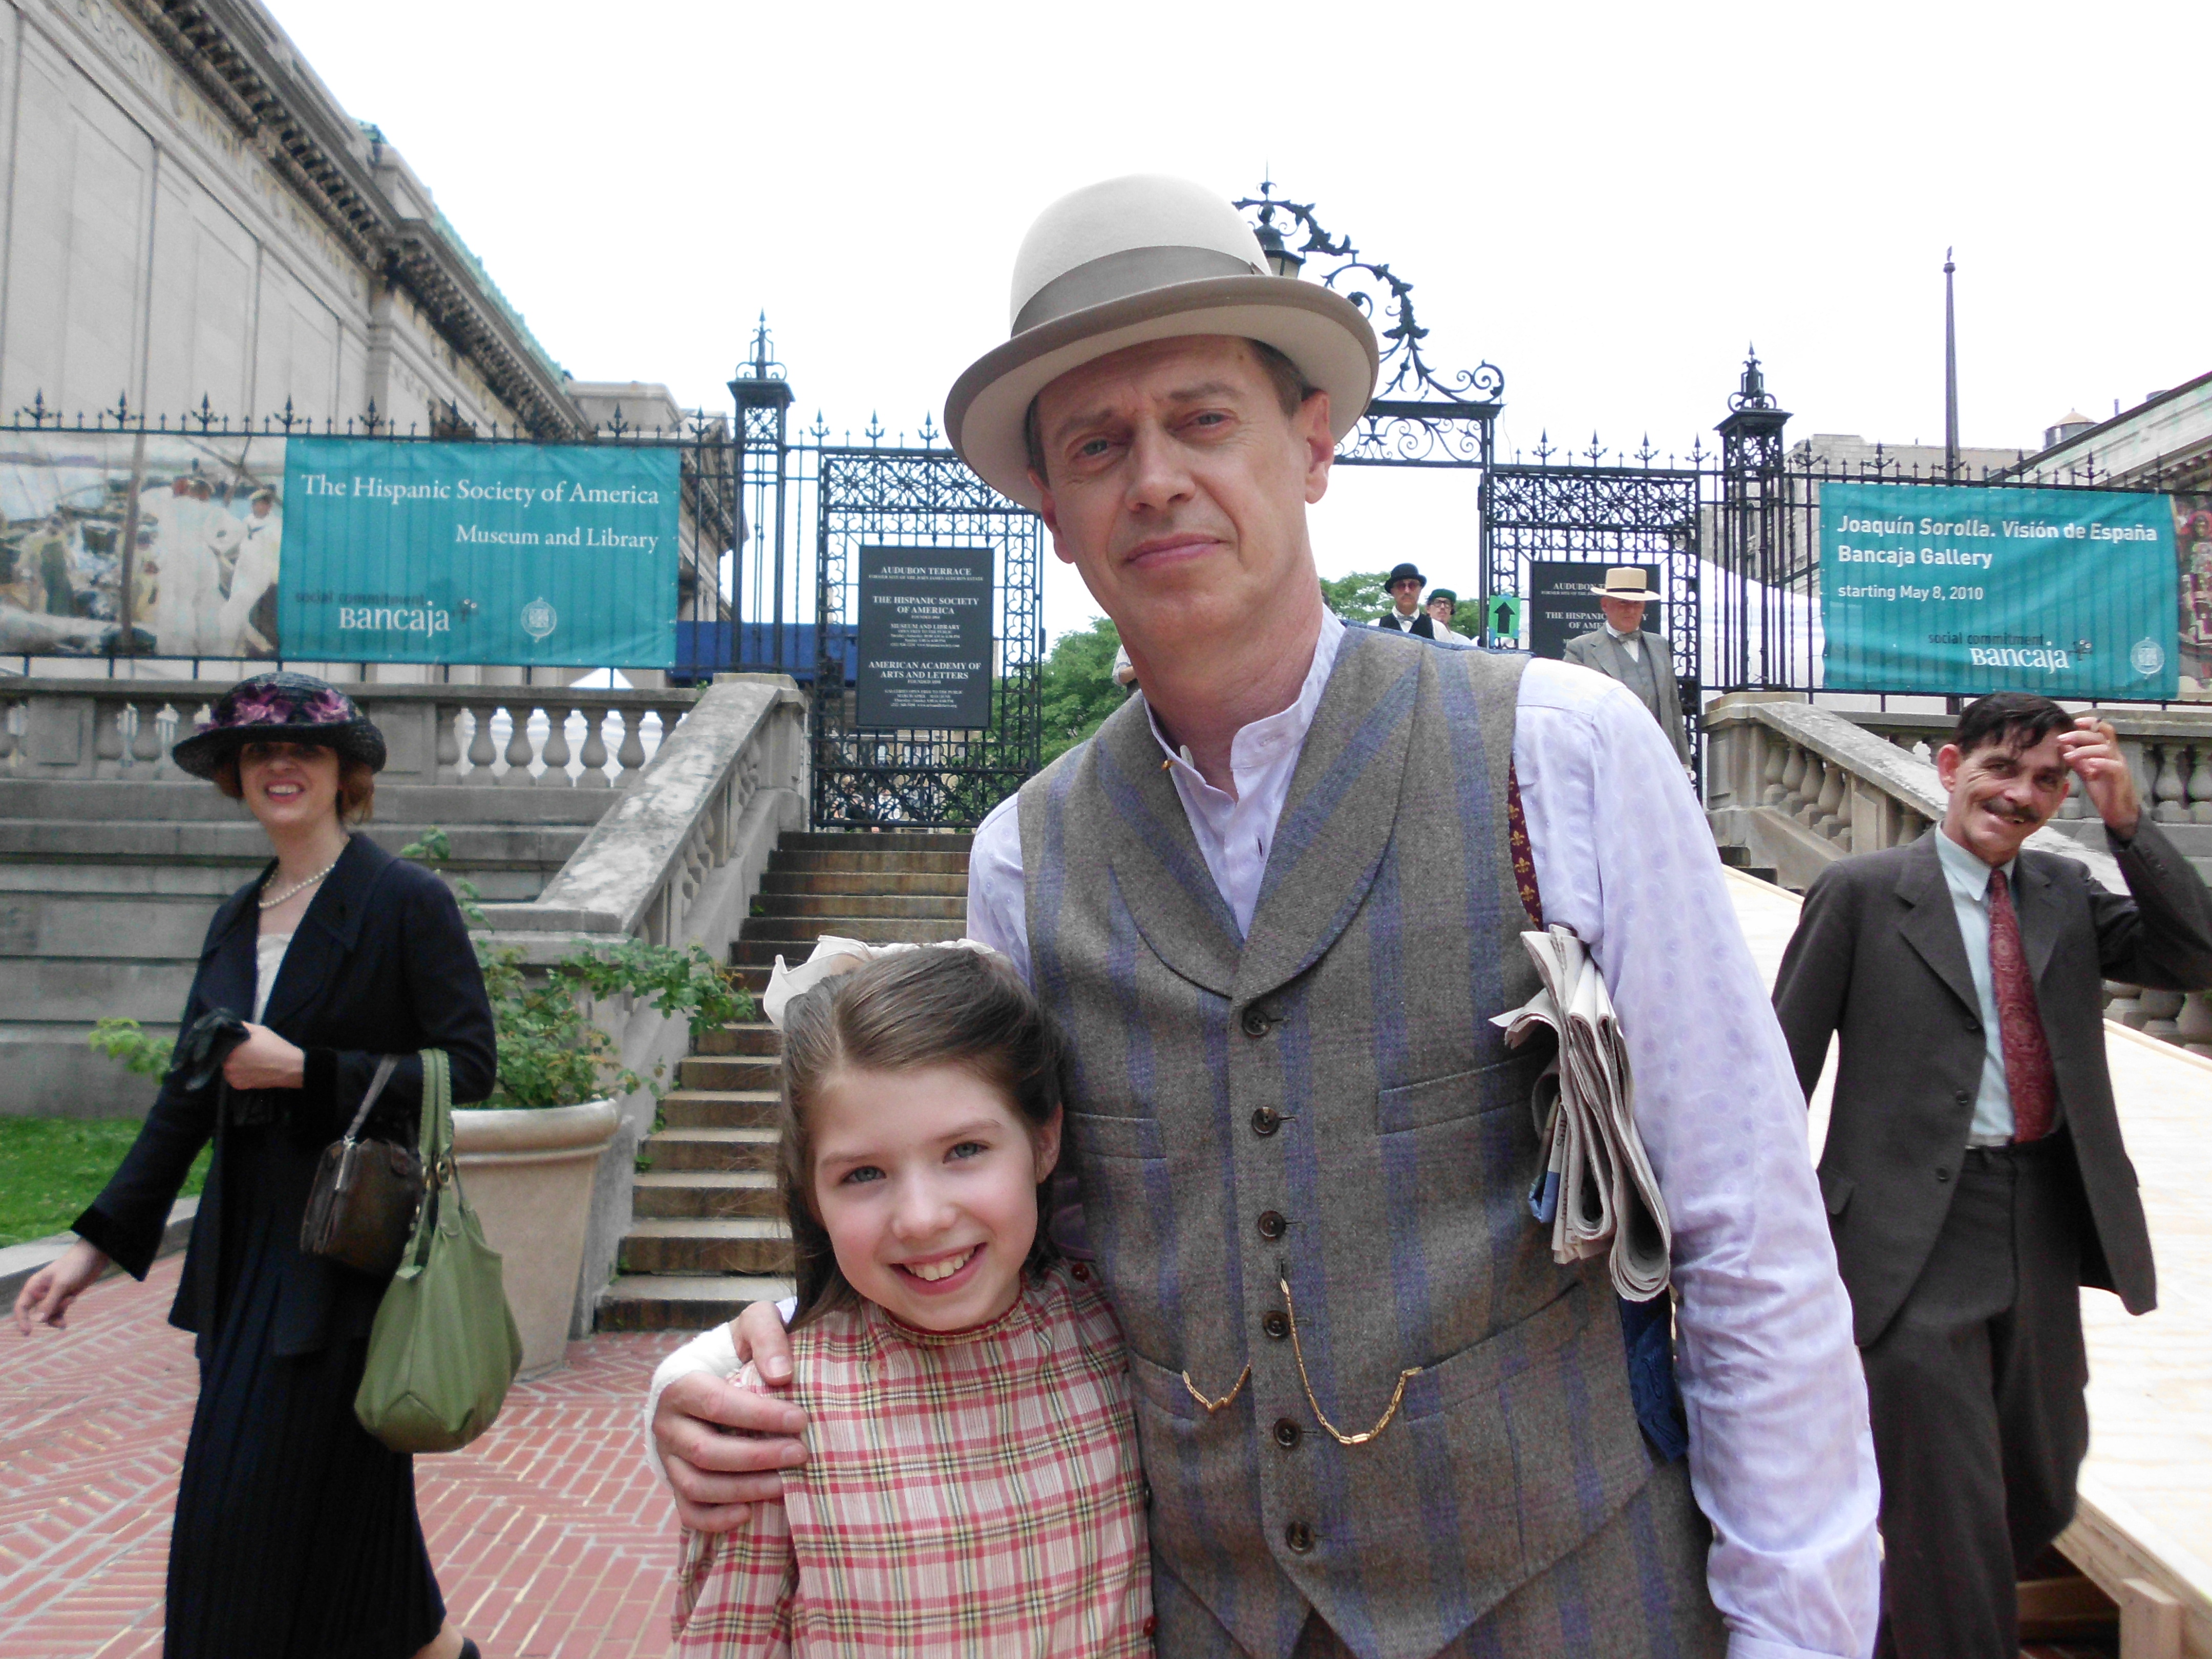 Booch O'Connell with Steve Buscemi on the set of Boardwalk Empire